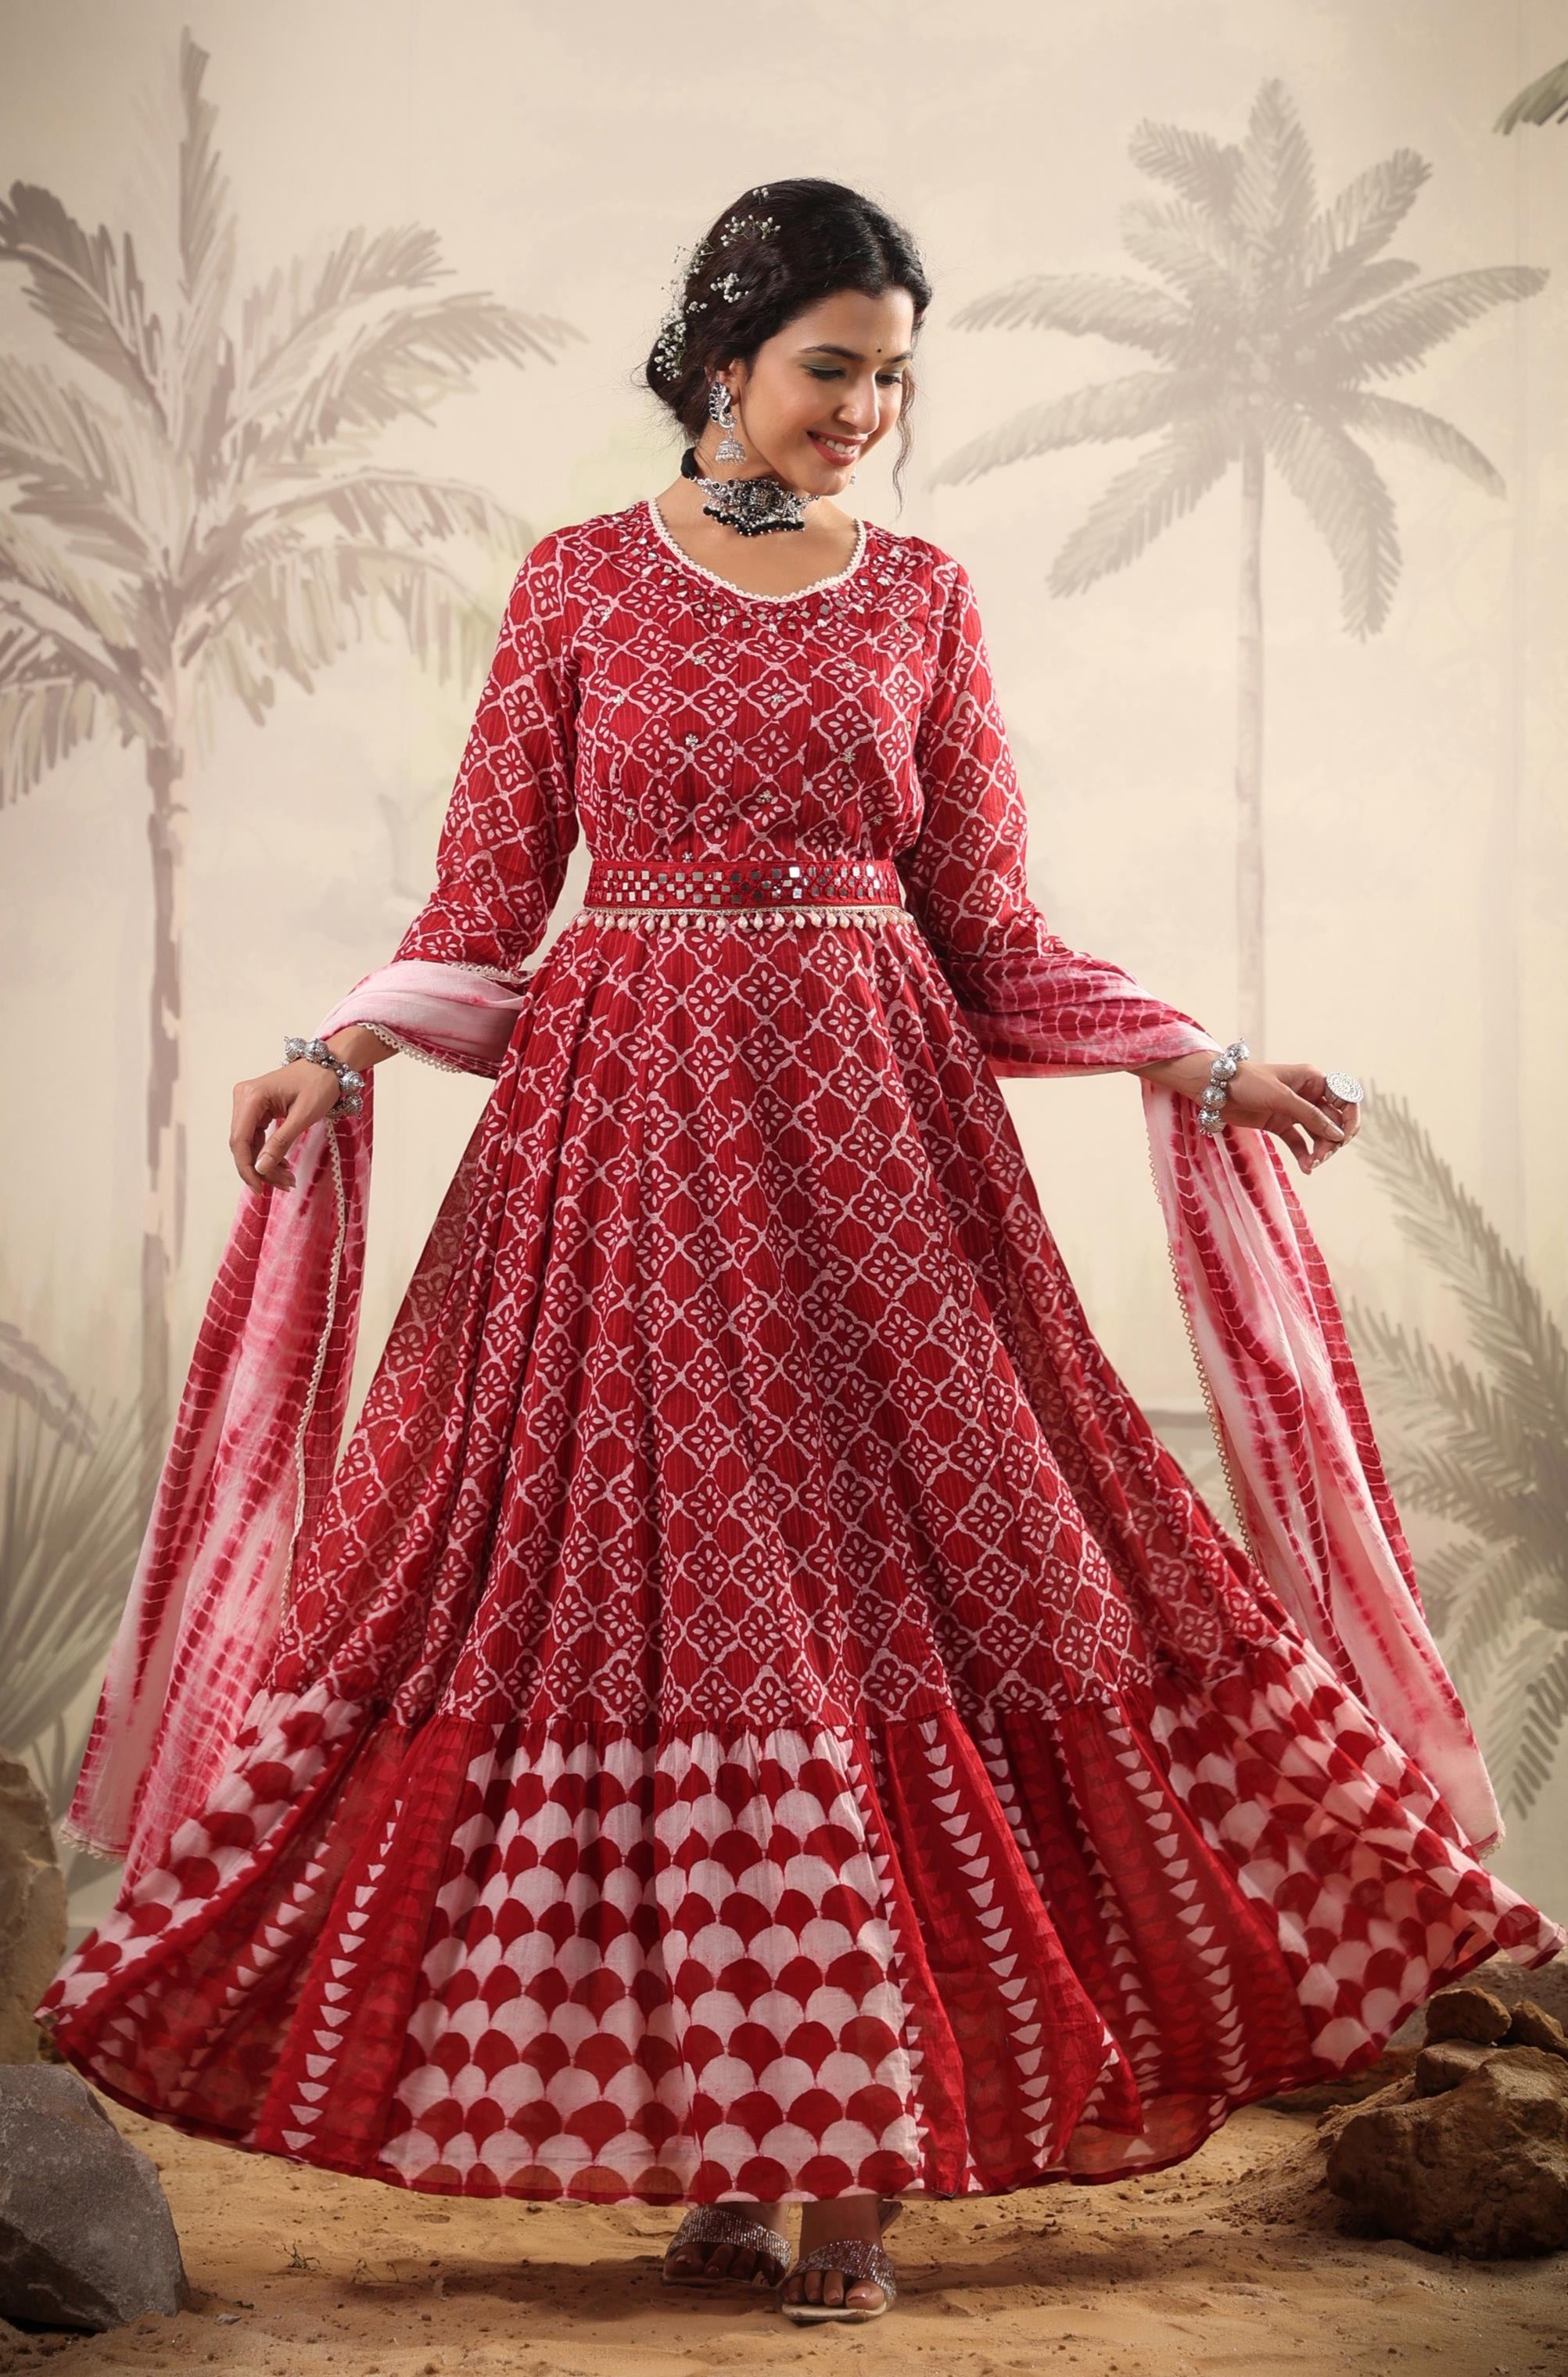 Red Colour Bollywood Style Partywear Beautiful Ethnic Dress - KSM PRINTS -  4194462